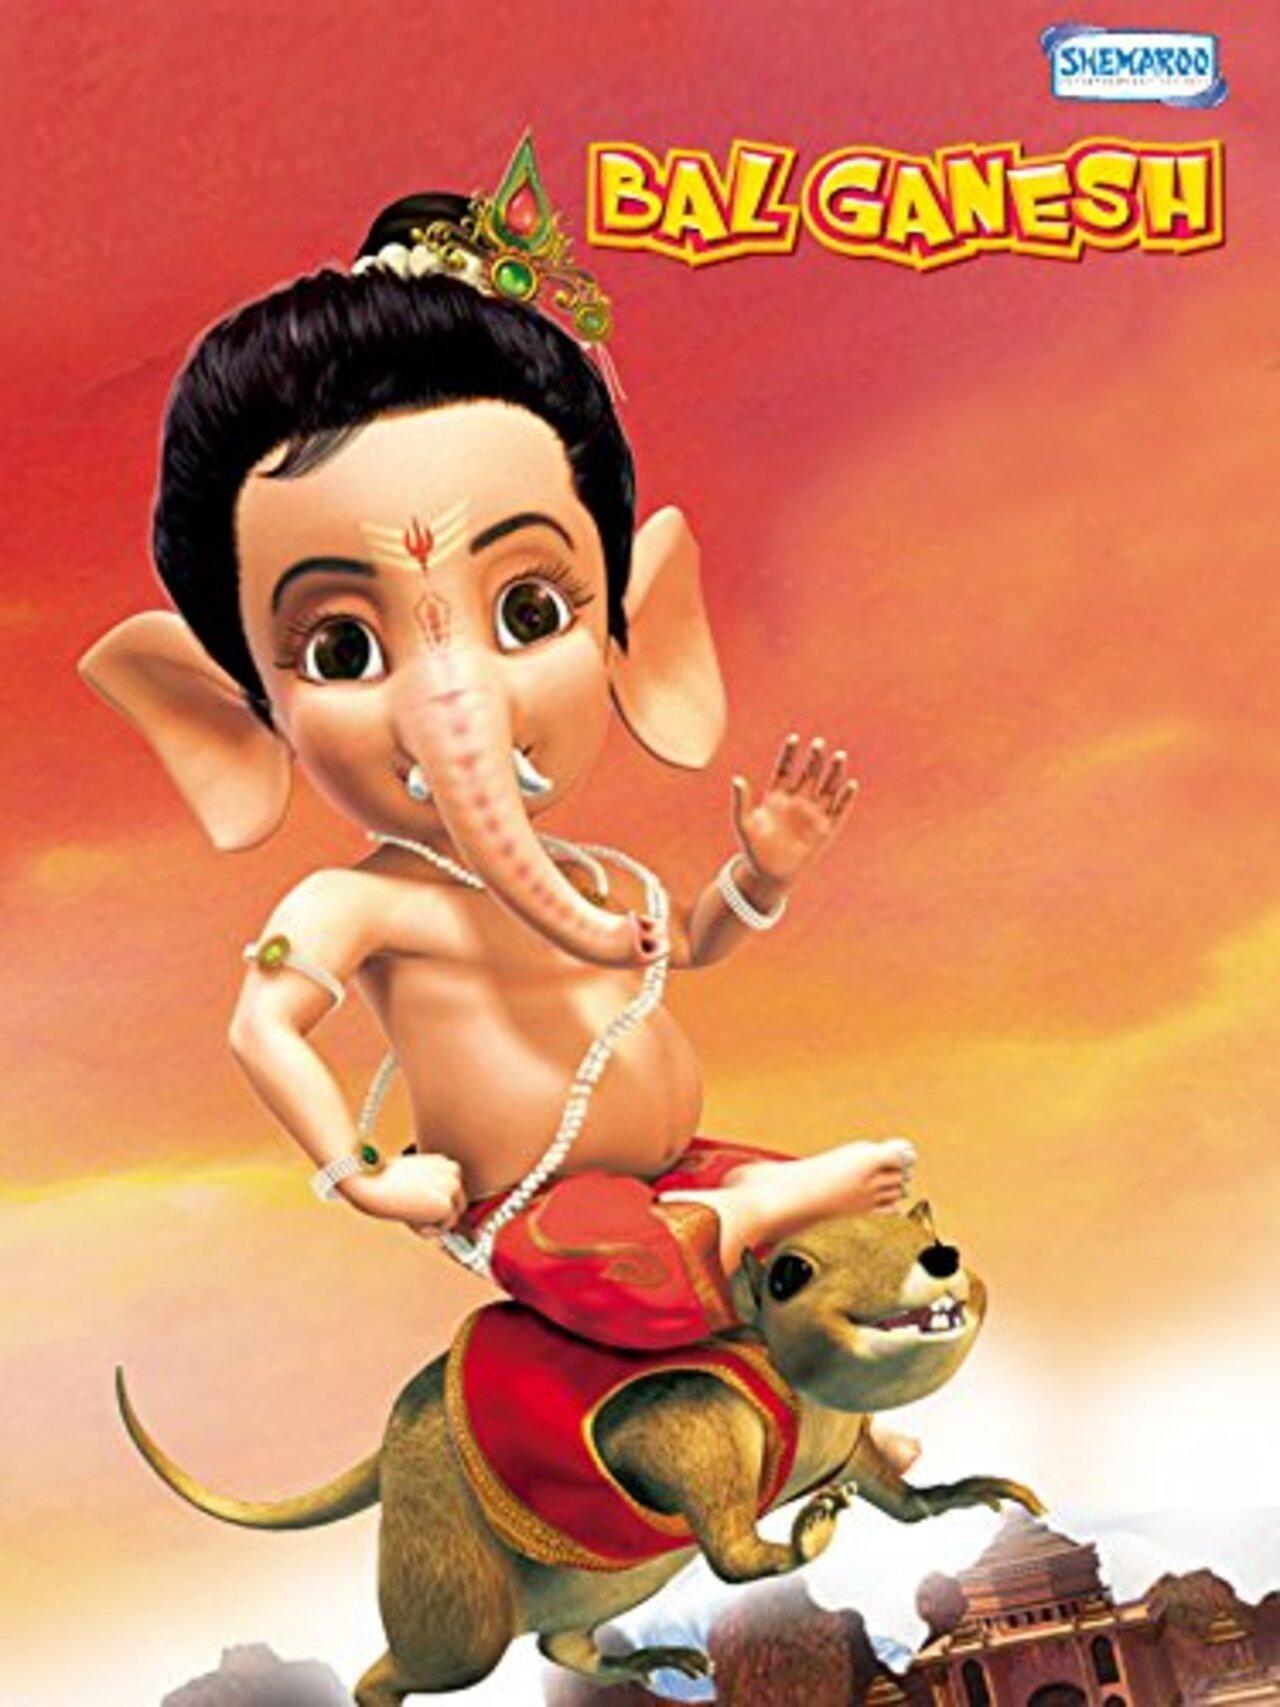 'Baal Ganesha' is a heartwarming and family-oriented animated film that beautifully narrates the enchanting tales of Lord Ganesha in his childhood. Released in 2007, this delightful movie takes viewers on a captivating journey through the mischievous yet endearing adventures of the young Ganesha